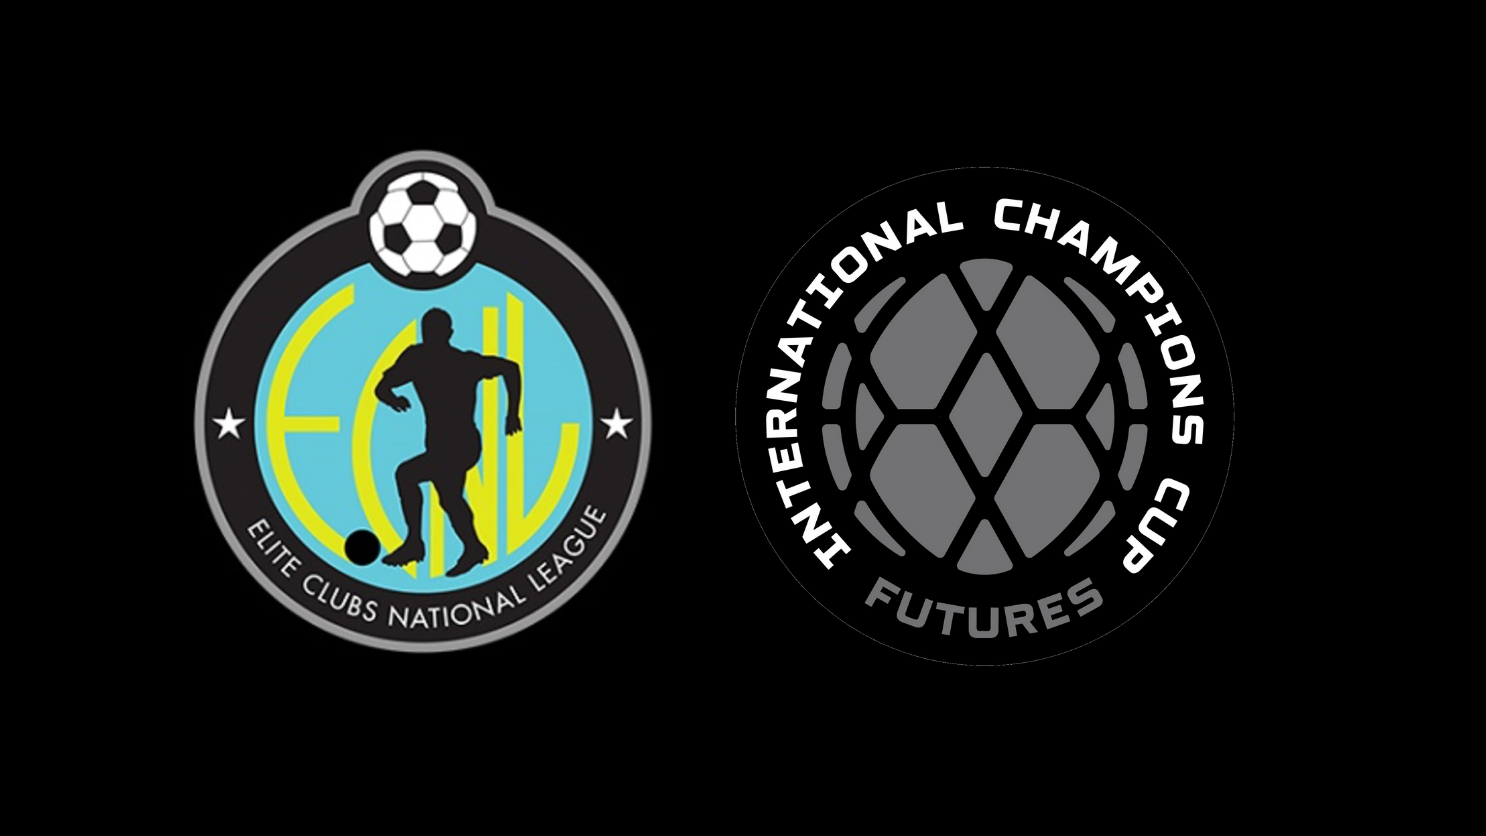 Thirty Six Boys Ecnl Players Selected For International Champions Cup Futures Tournament Soccerwire